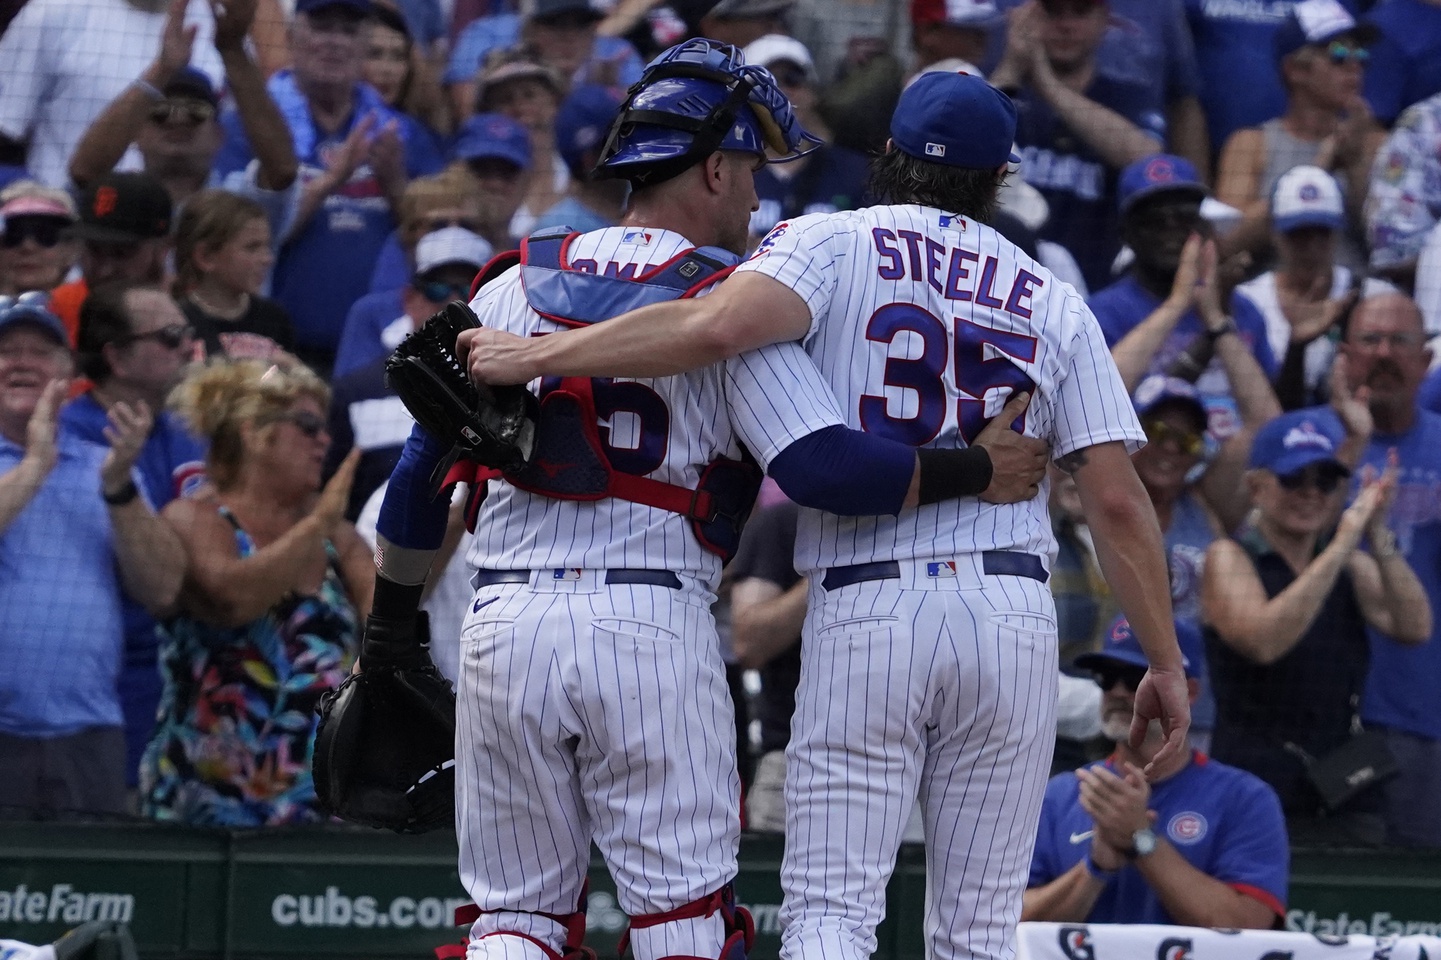 Chicago Cubs: Justin Steele Joins List Of 4 Elite Pitchers After